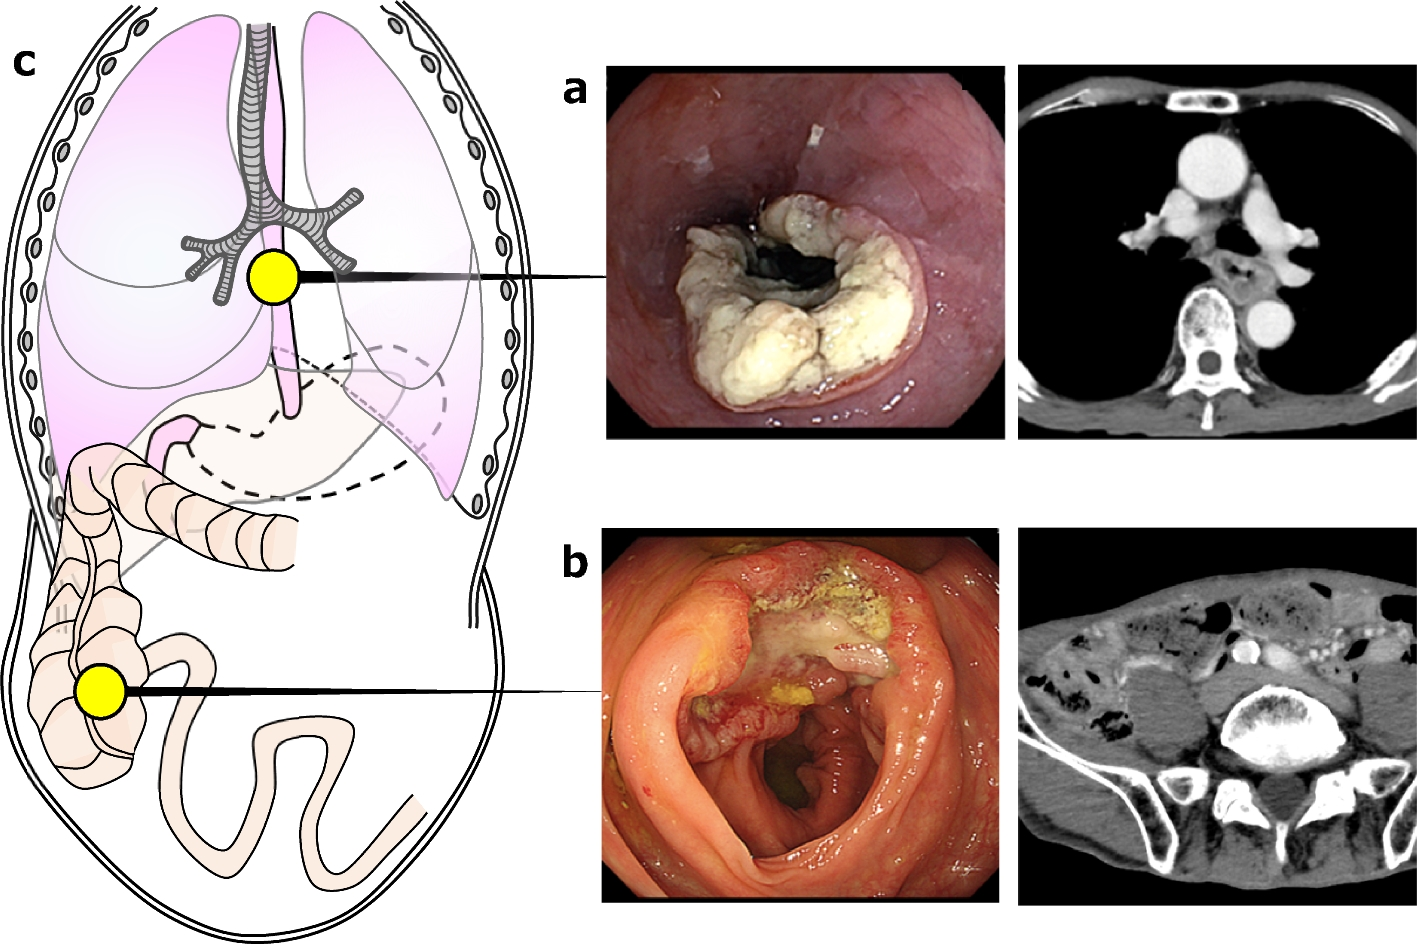 Successful multidisciplinary treatment for synchronous advanced esophageal and cecal cancers after total gastrectomy with reconstruction by jejunal interposition